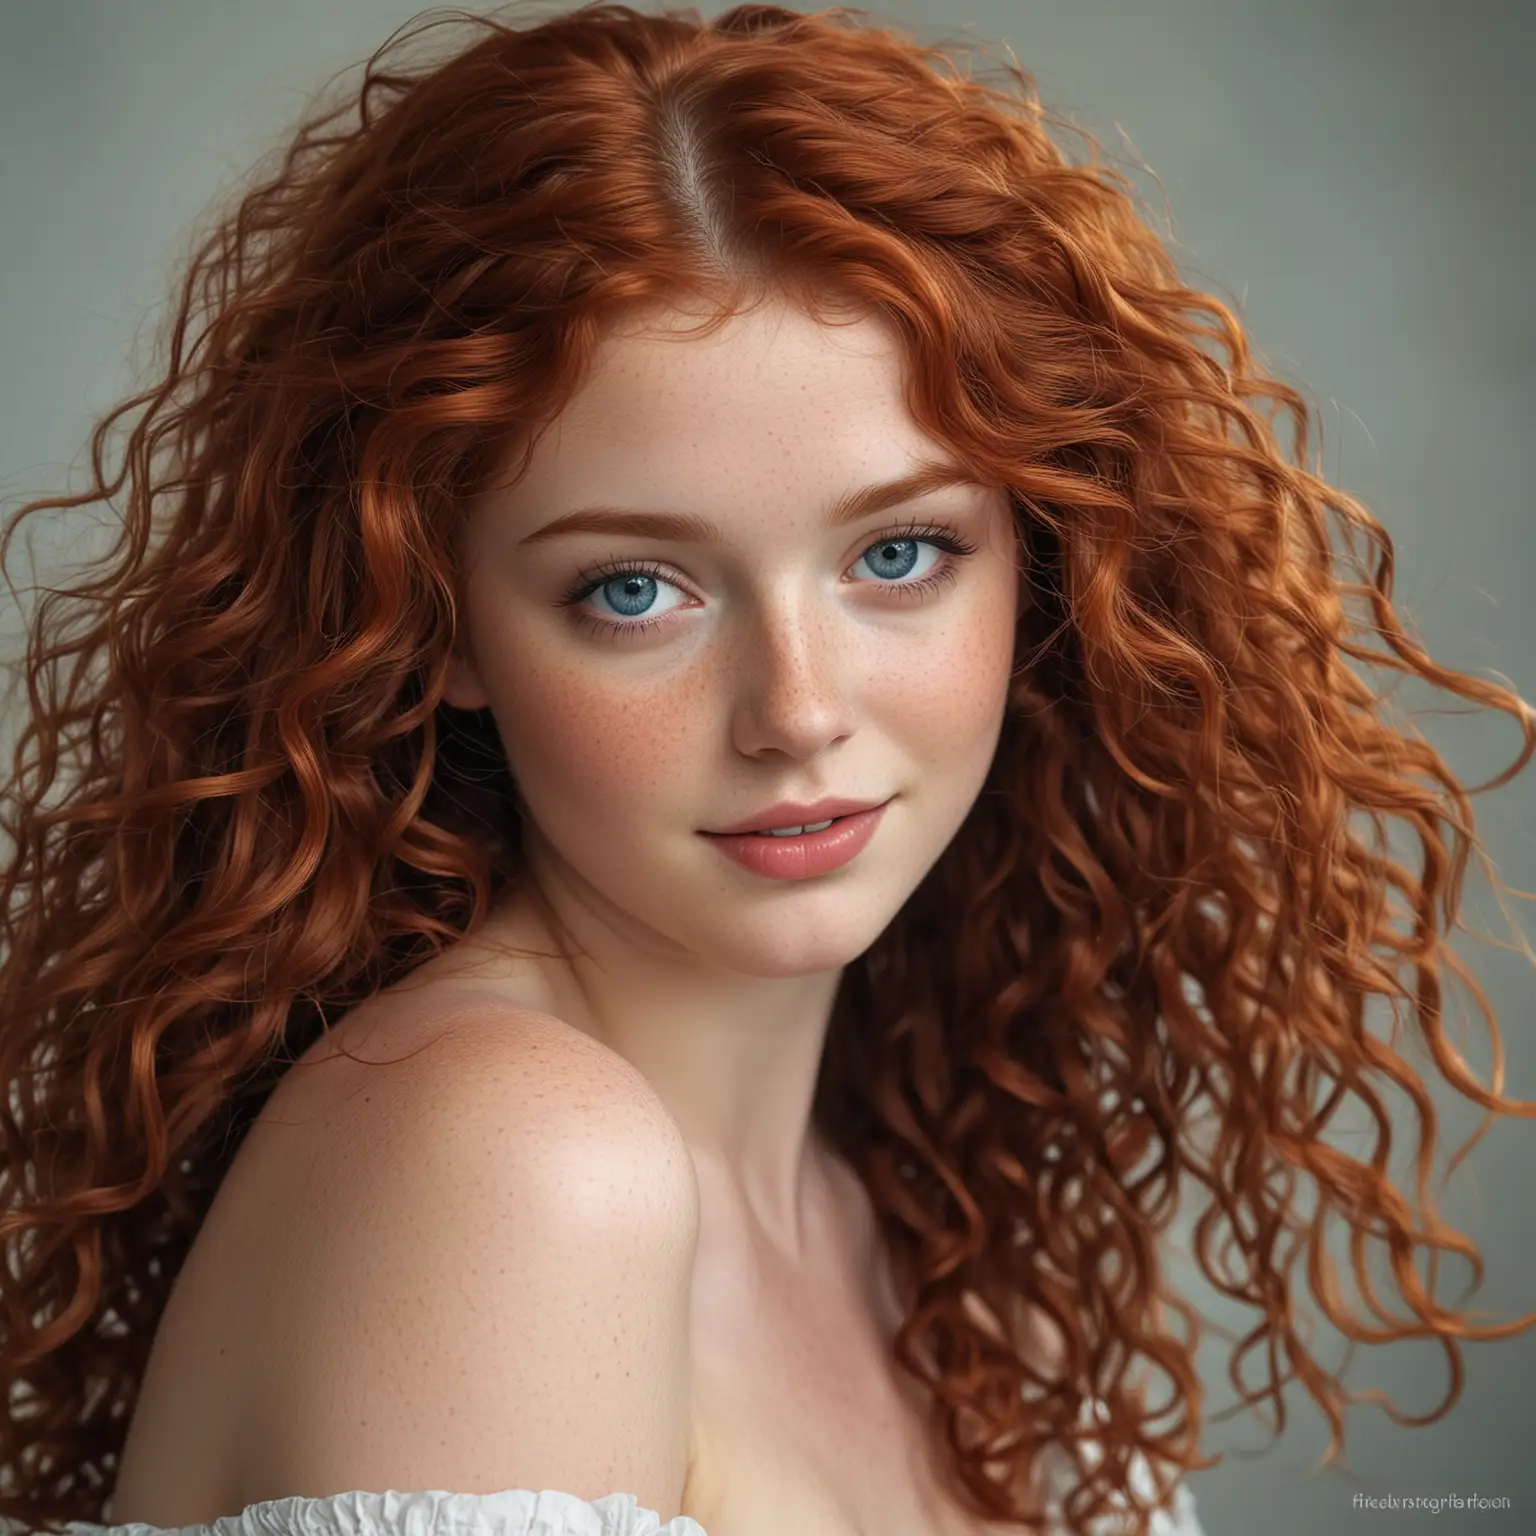 Enchanting Woman with Radiant Blue Eyes and Romantic Red Hair